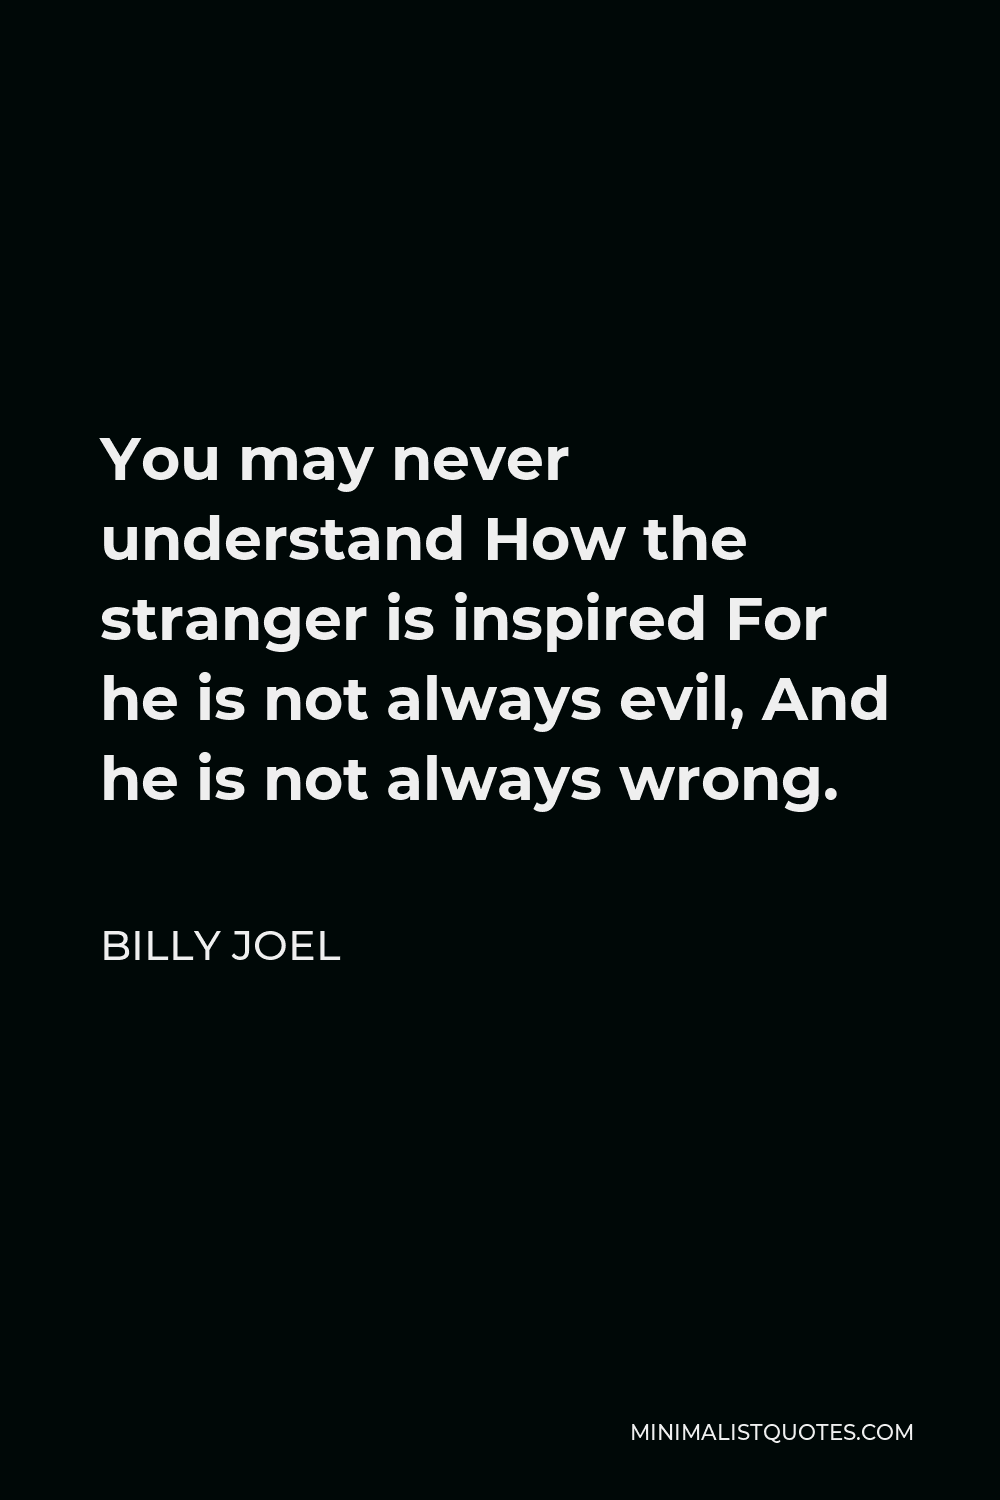 Billy Joel Quote - You may never understand How the stranger is inspired For he is not always evil, And he is not always wrong.